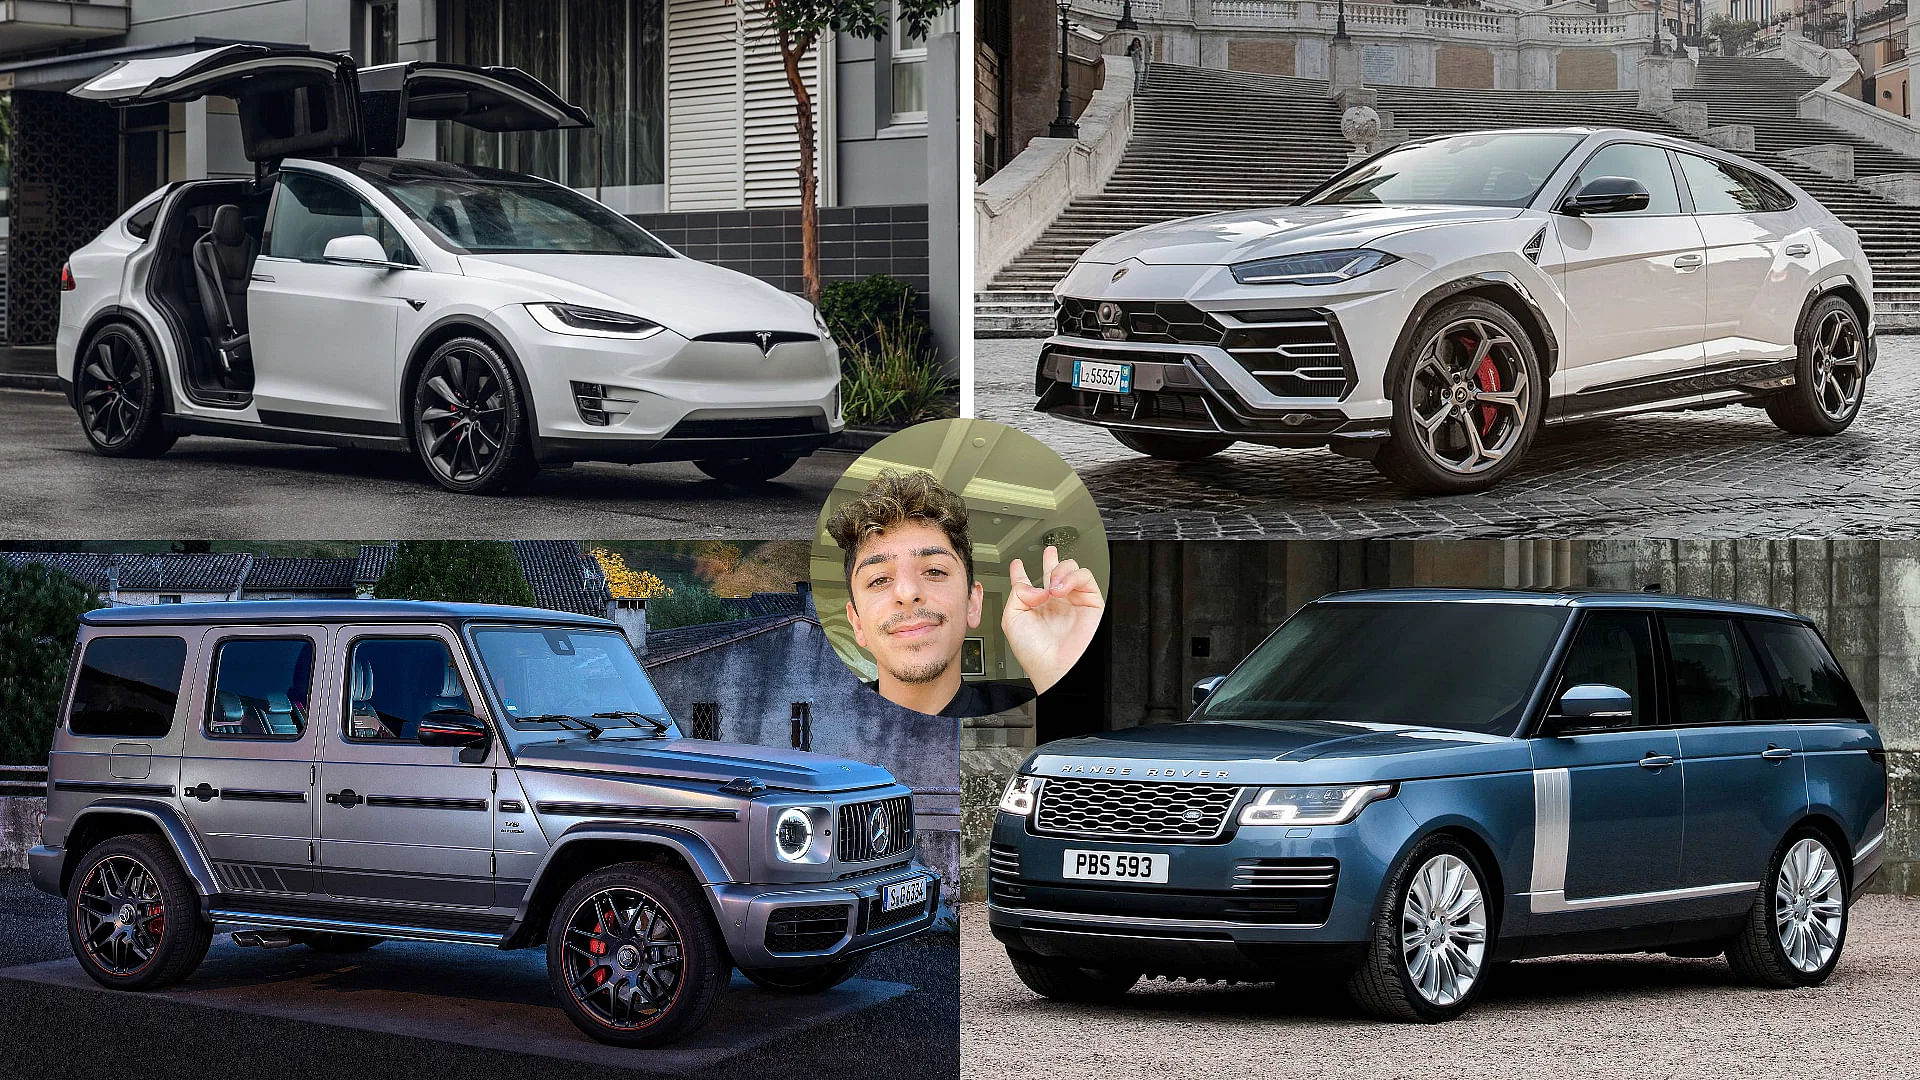 Here’s a look into Faze Rug's Jazzy Car Collection